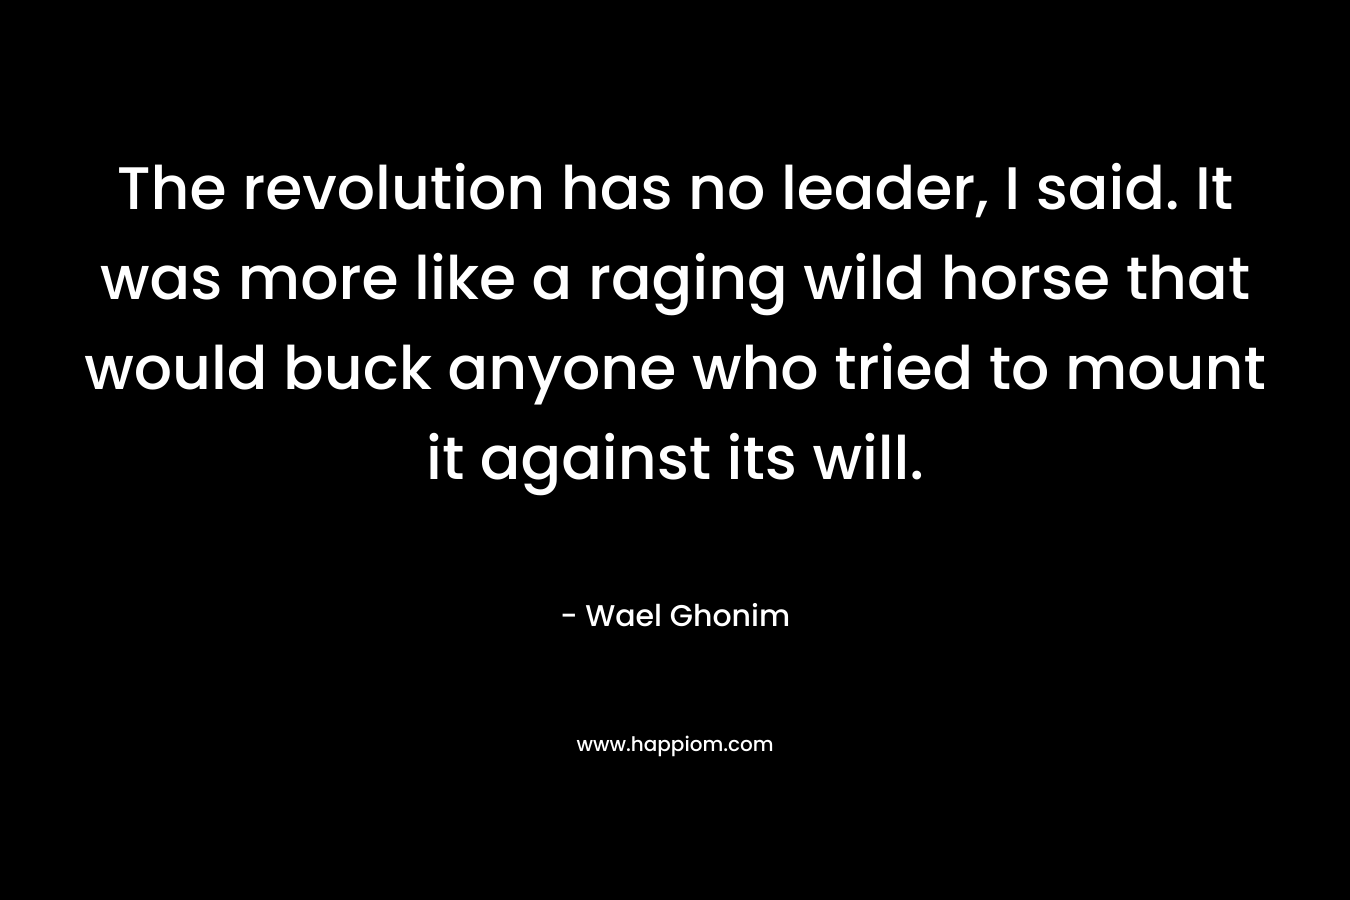 The revolution has no leader, I said. It was more like a raging wild horse that would buck anyone who tried to mount it against its will. – Wael Ghonim